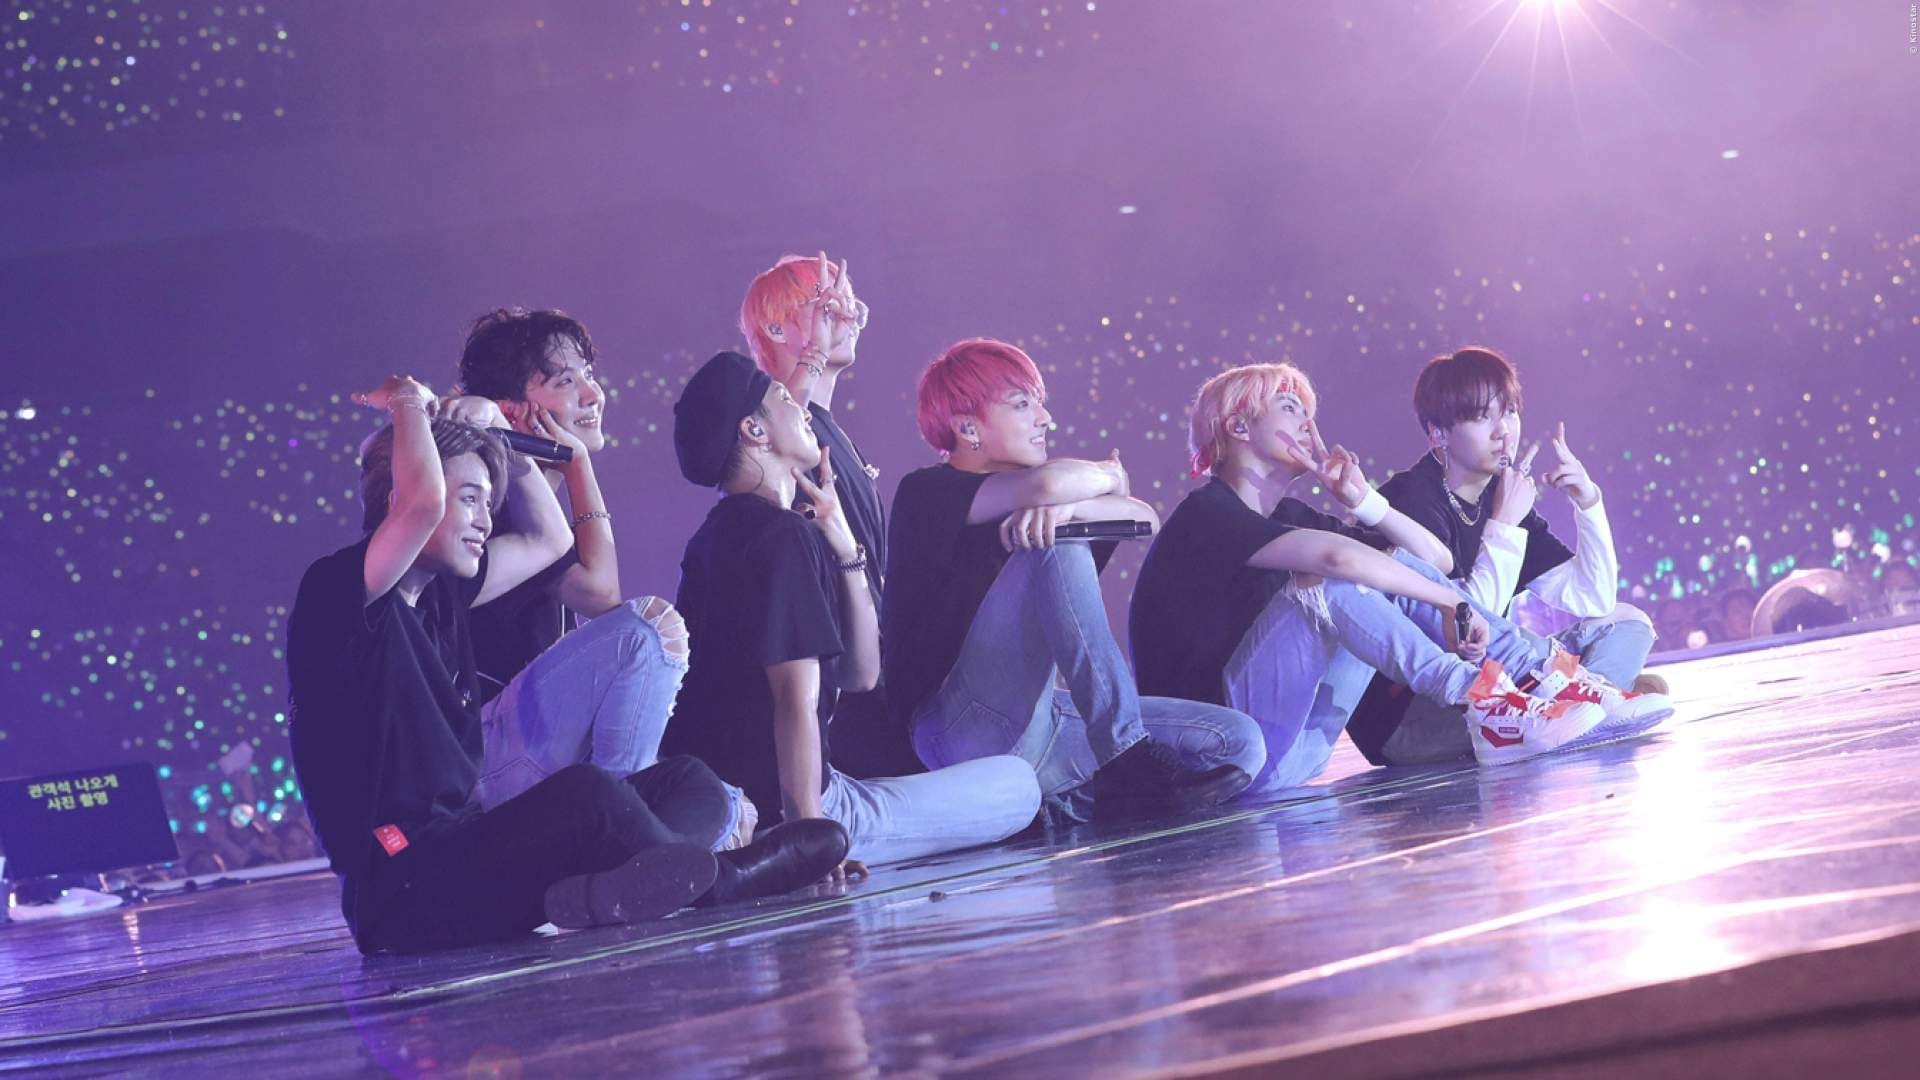 Bts Love Yourself Tour Commentary BTS World Tour: Love Yourself in Seoul (2019) YIFY - Download Movie TORRENT - YTS, (2019-01-26